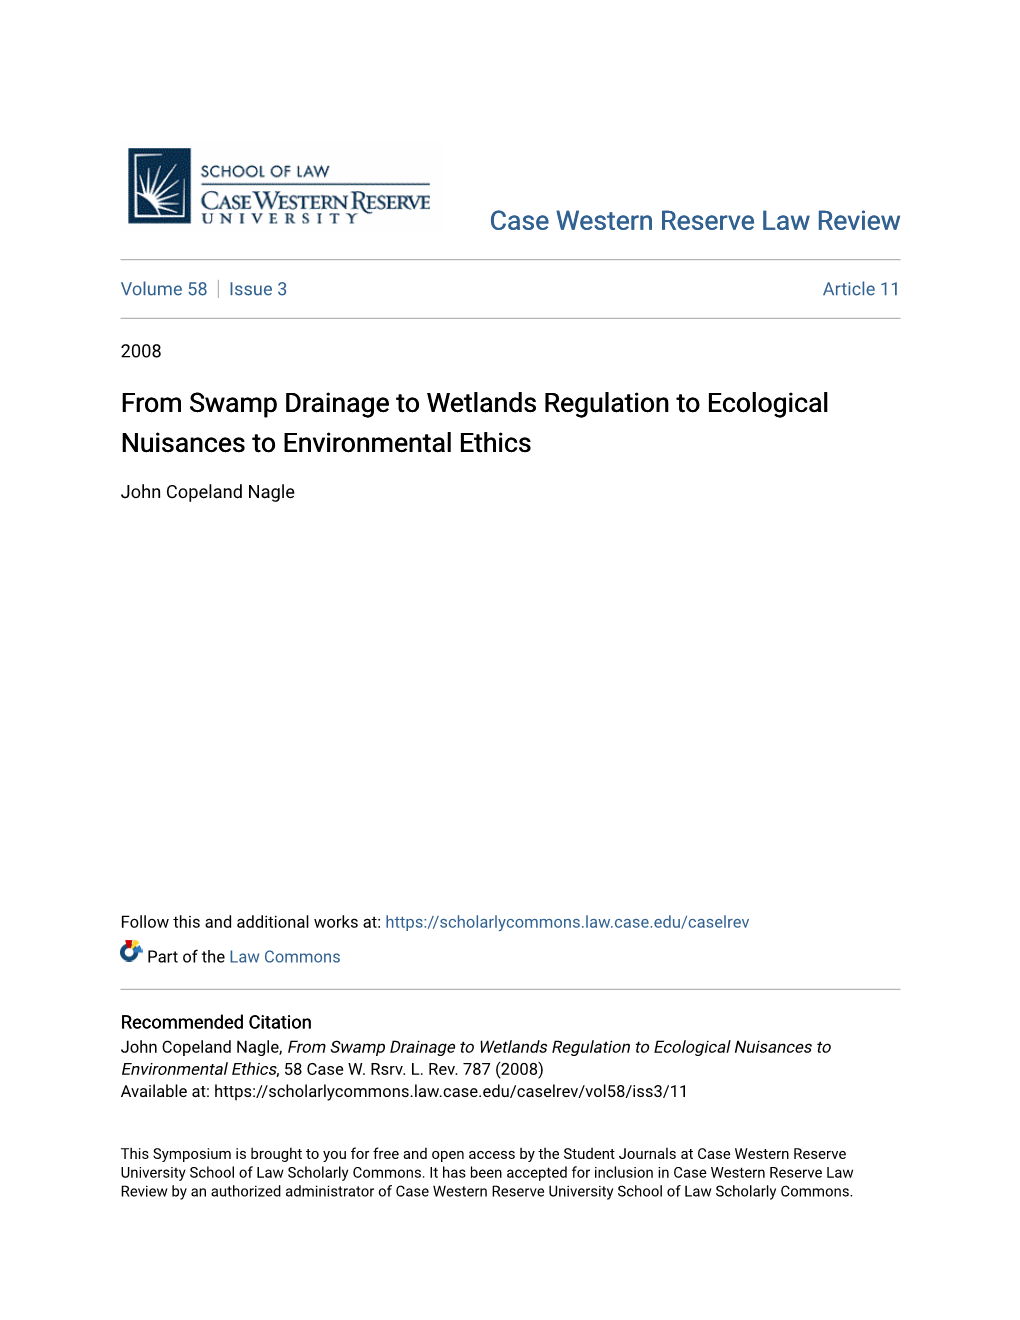 From Swamp Drainage to Wetlands Regulation to Ecological Nuisances to Environmental Ethics